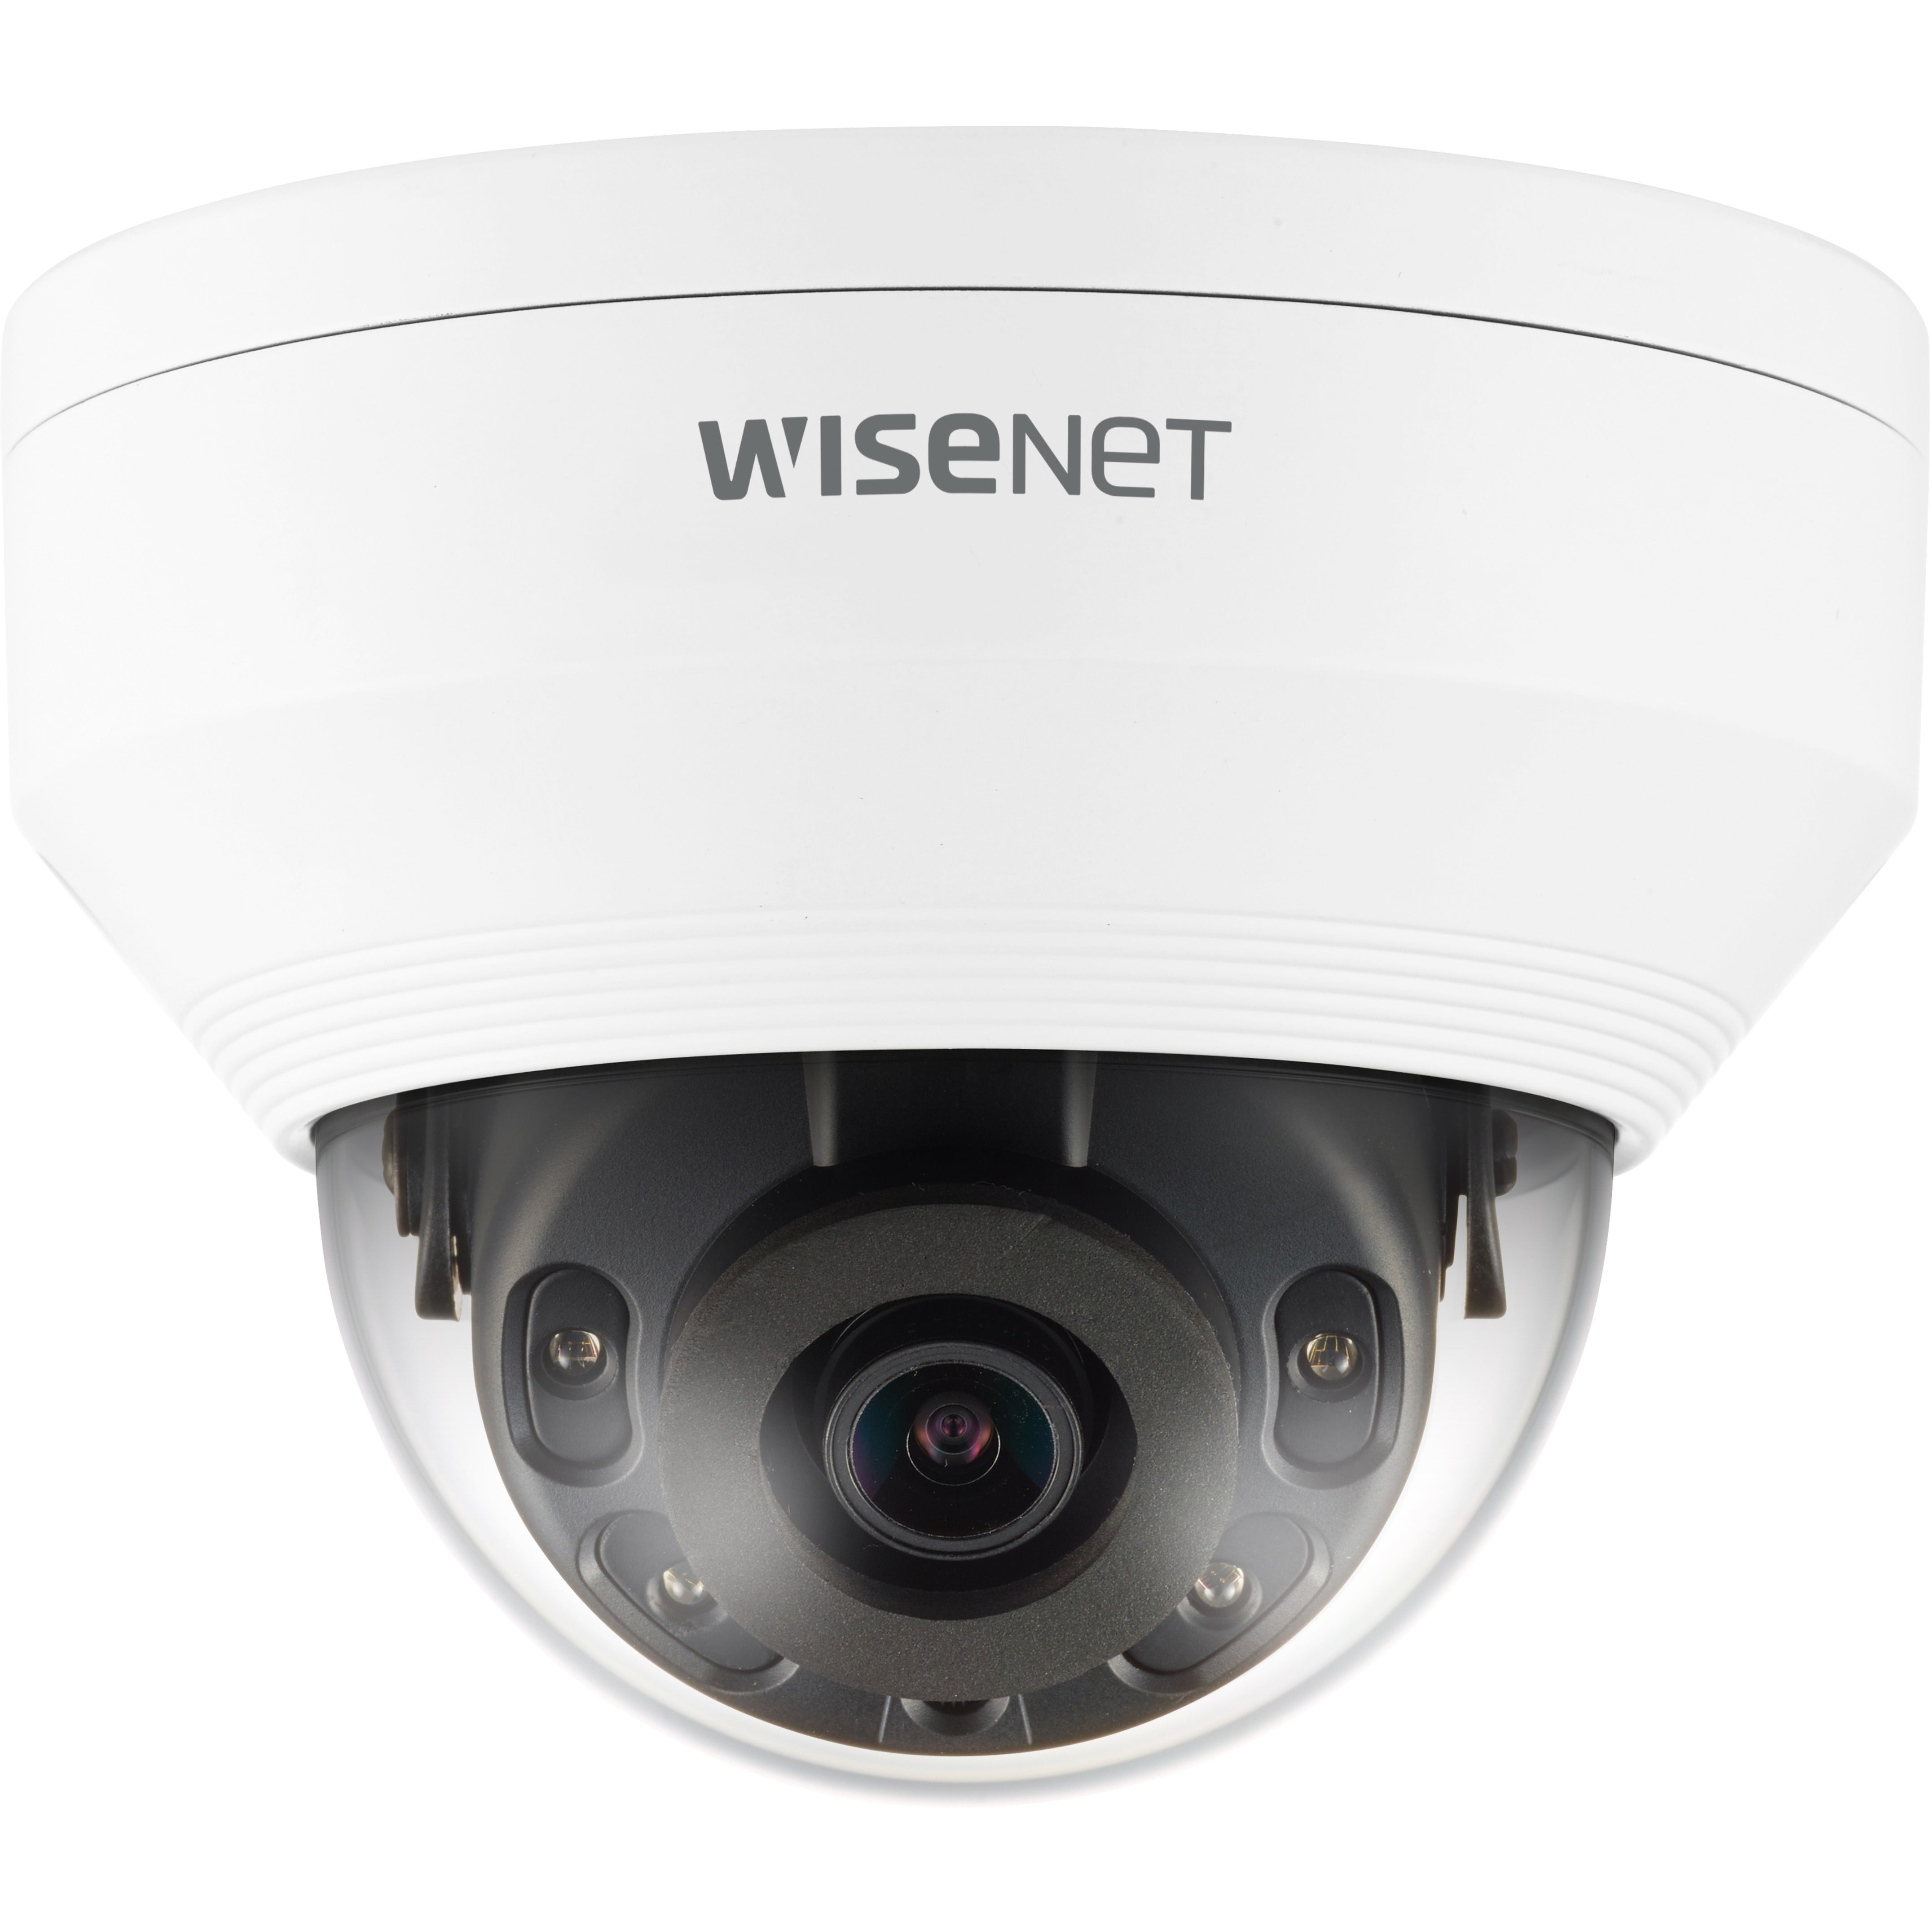 Wisenet QNV-8010R 5MP Network IR Dome Camera, Wide Dynamic Range, SD Card Local Storage, IK10 Impact Protection Rating